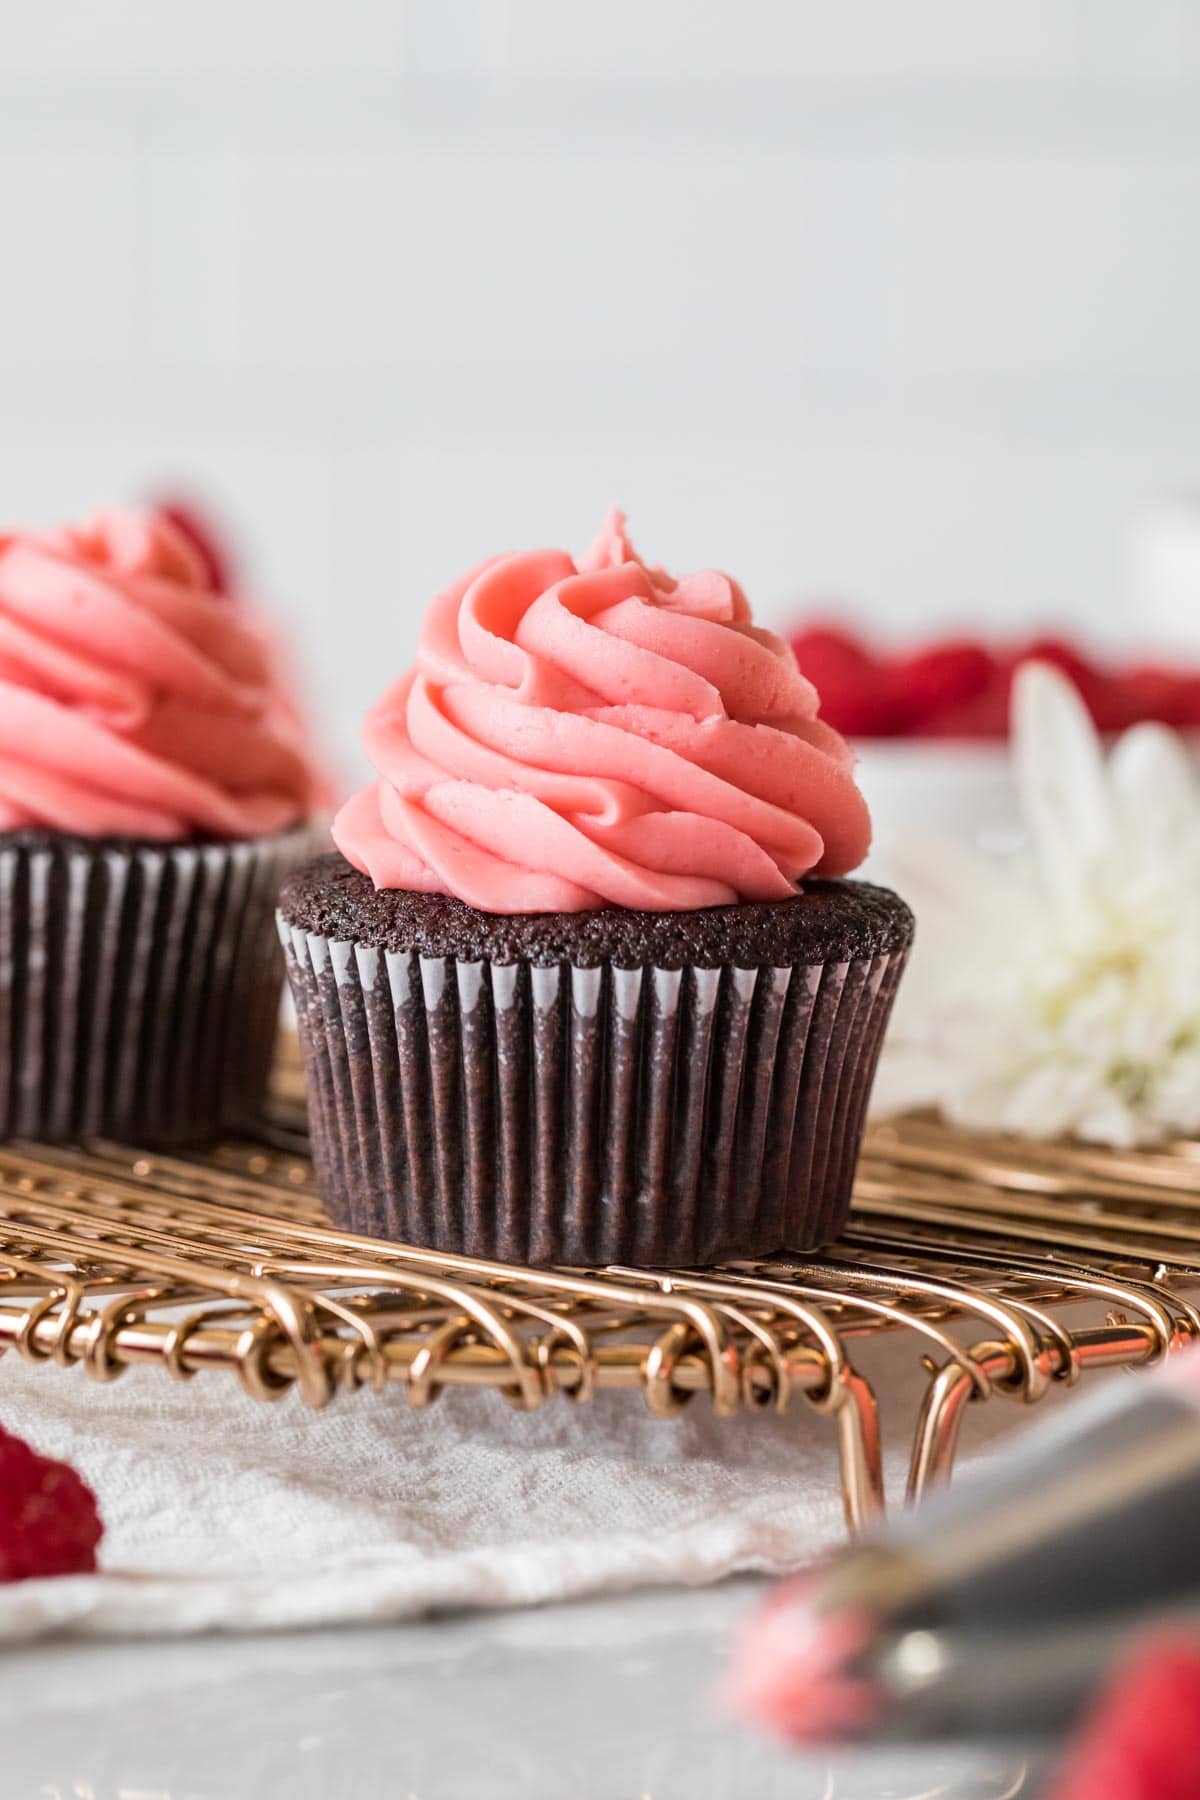 Head-on view of a chocolate cupcake frosted with pink frosting.